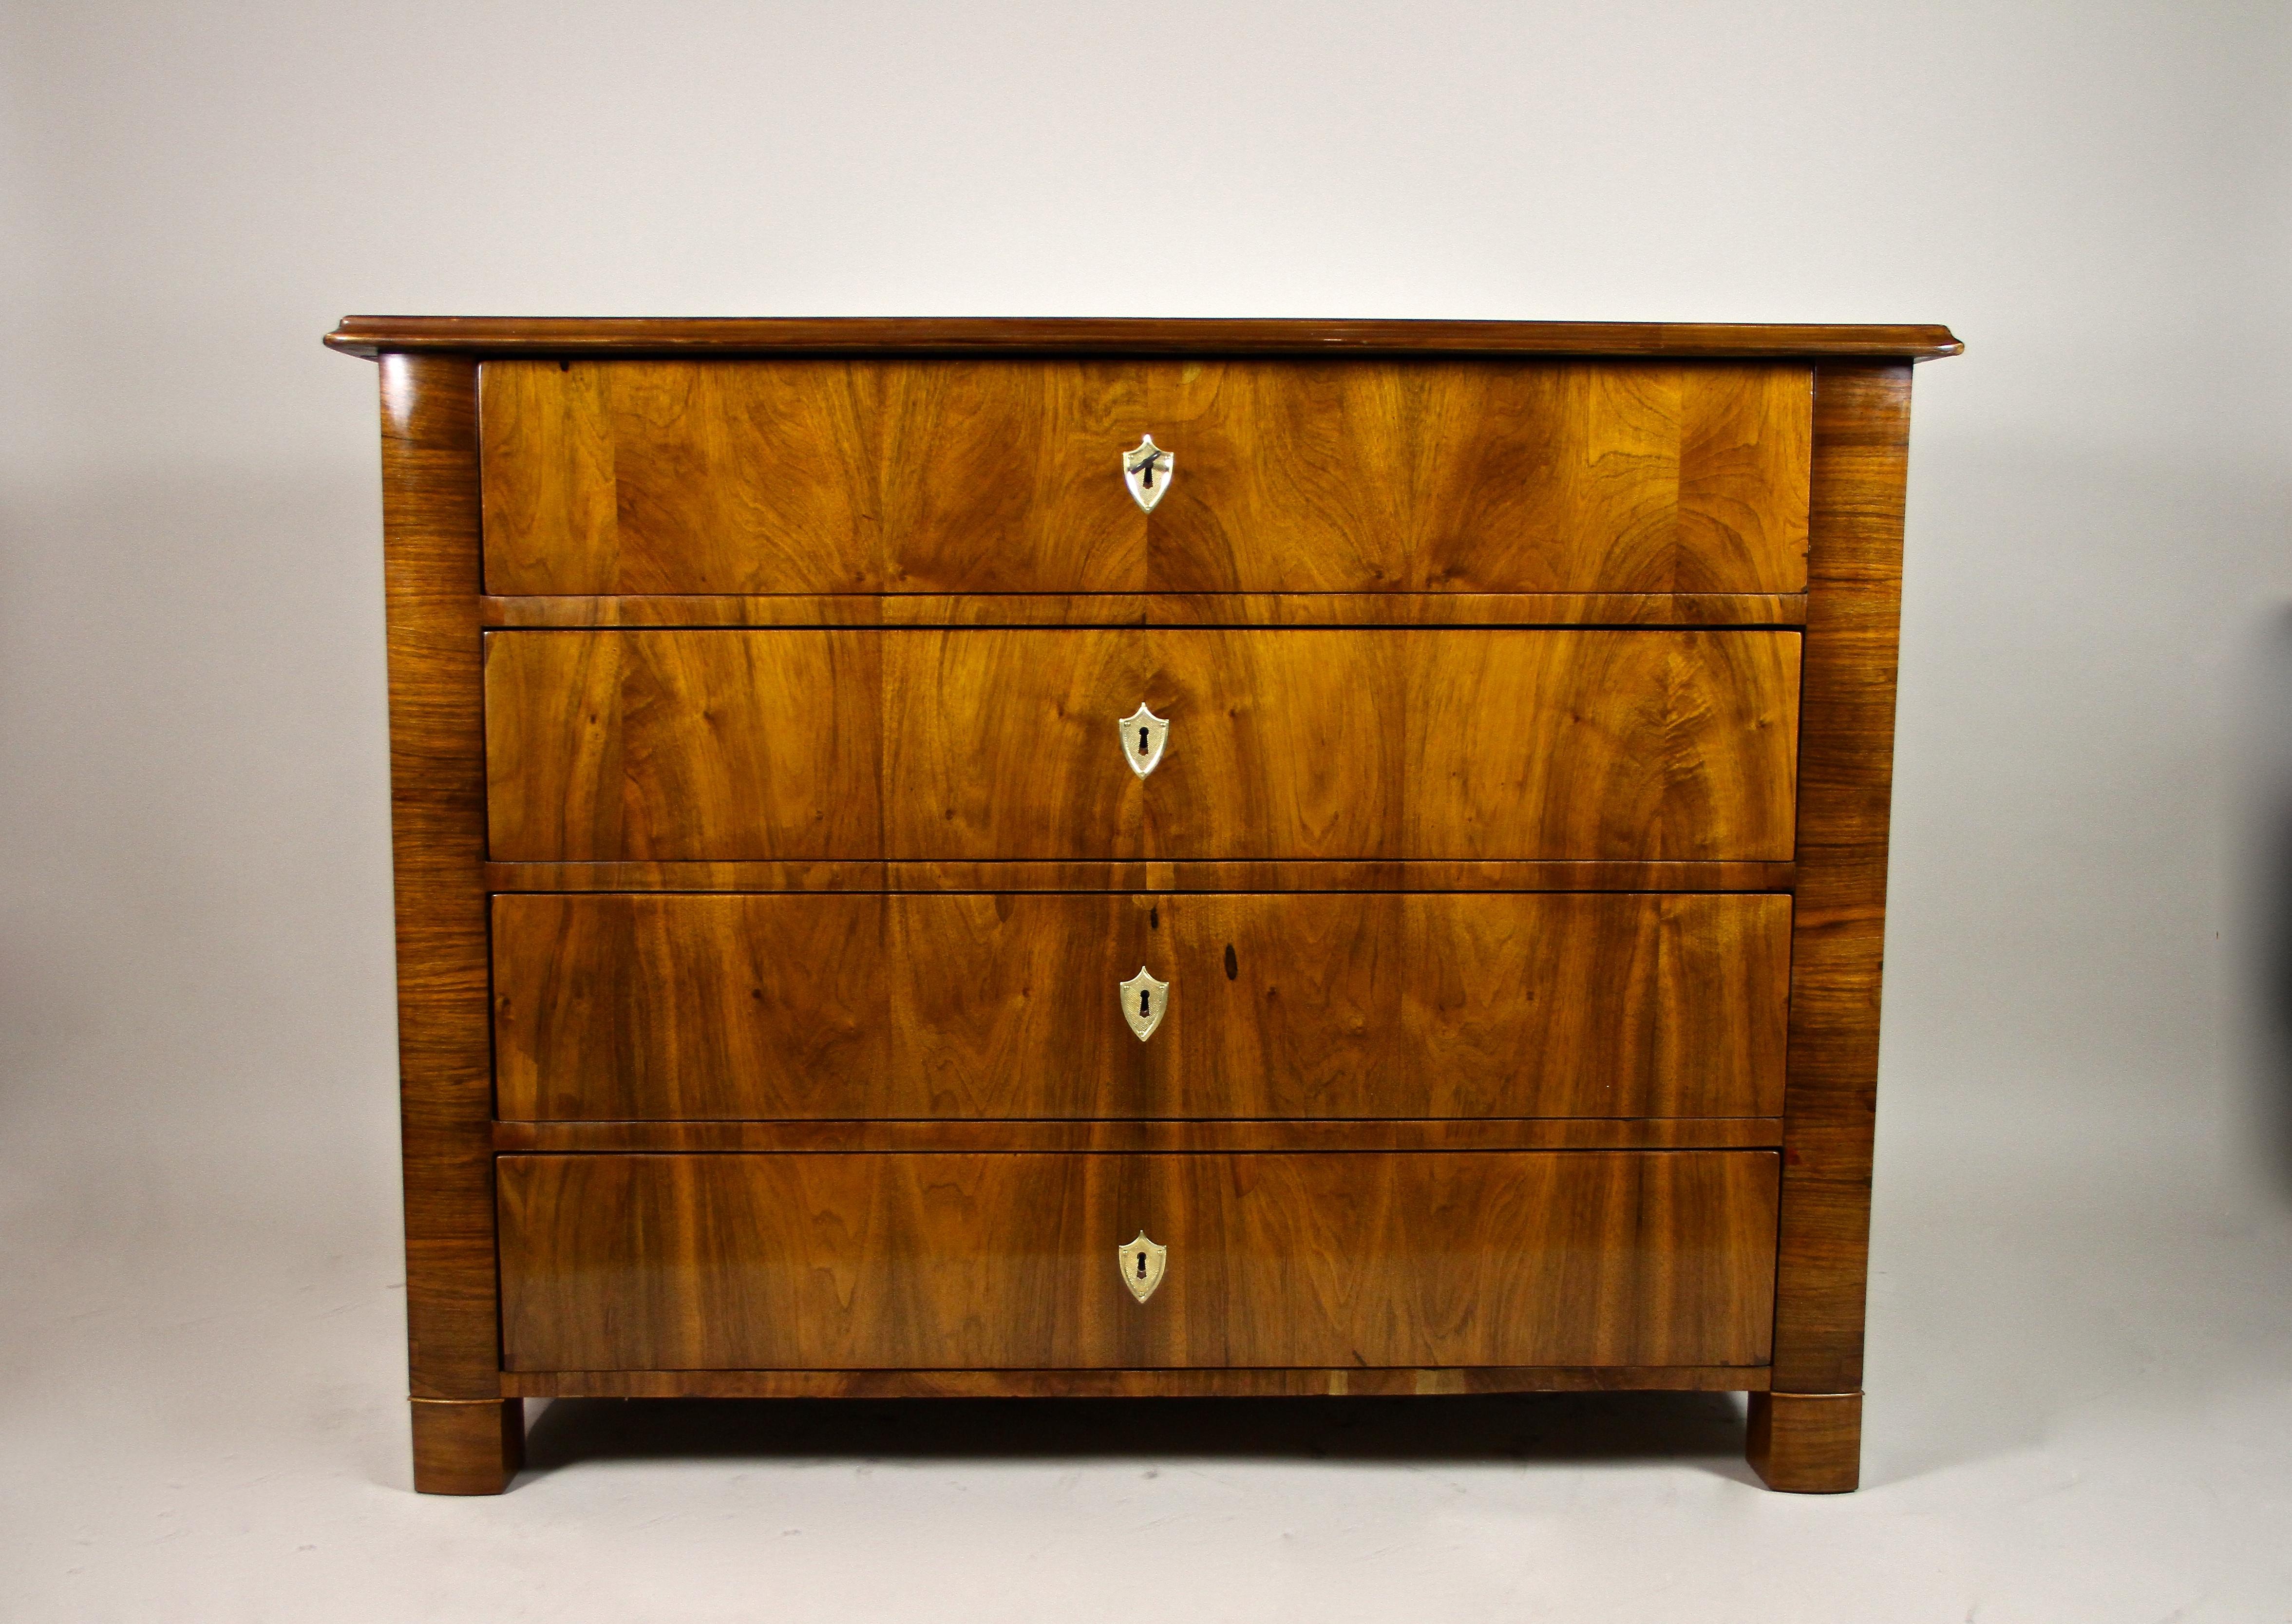 Outstanding 19th century chest of drawers from the famous Biedermeier period in Vienna/ Austria around 1840. Impressing with an absolute fantastic grain, this elaborately restored commode offers four large, lockable drawers which provide a lot of